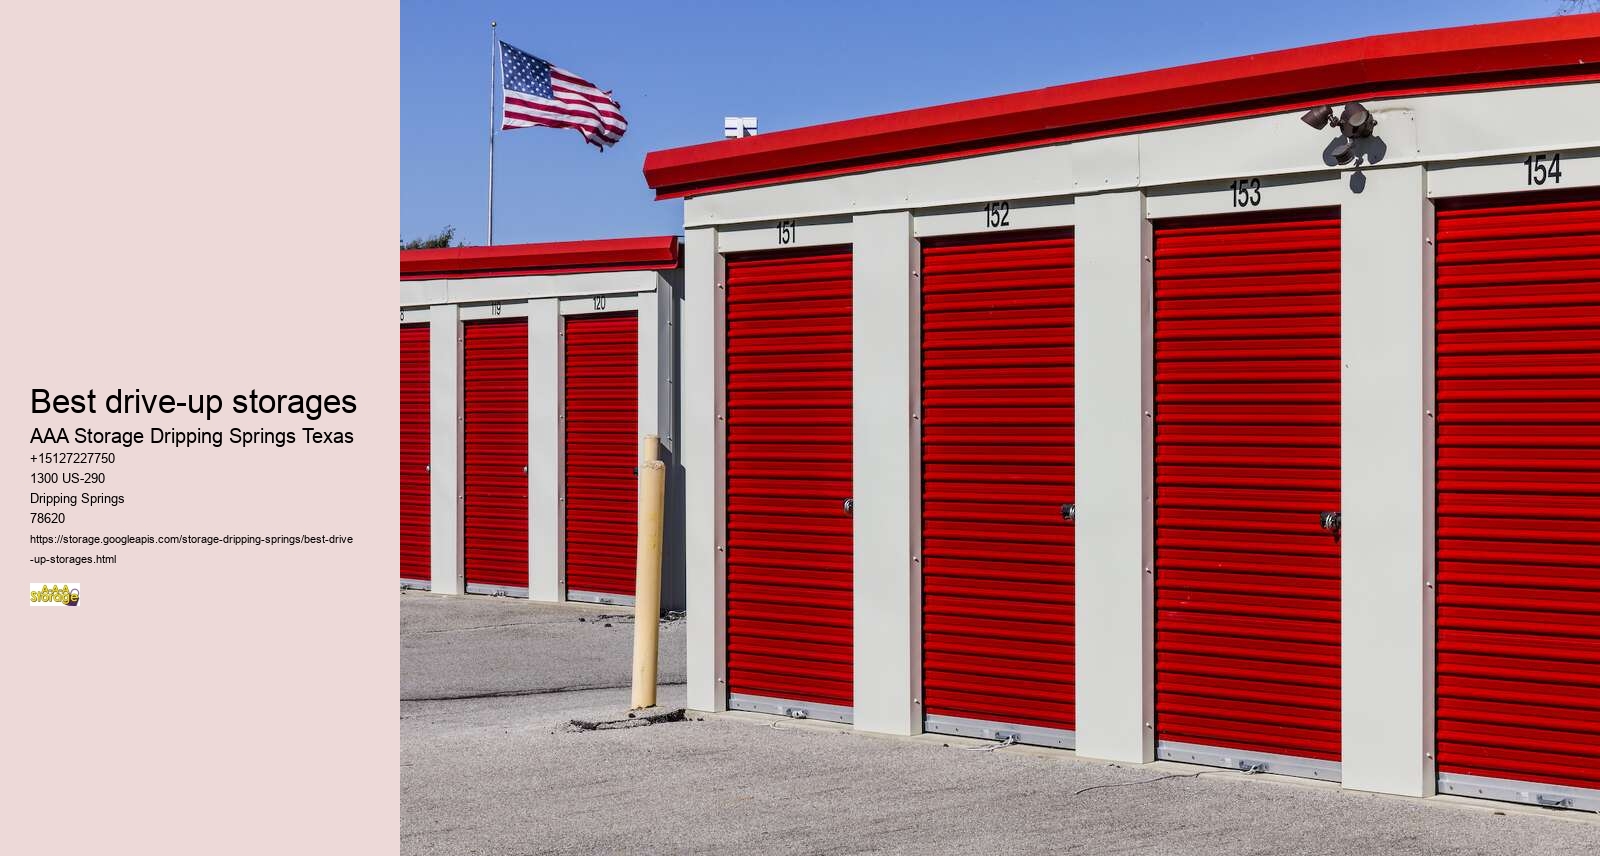 climate controlled self storage facilities Dripping Springs